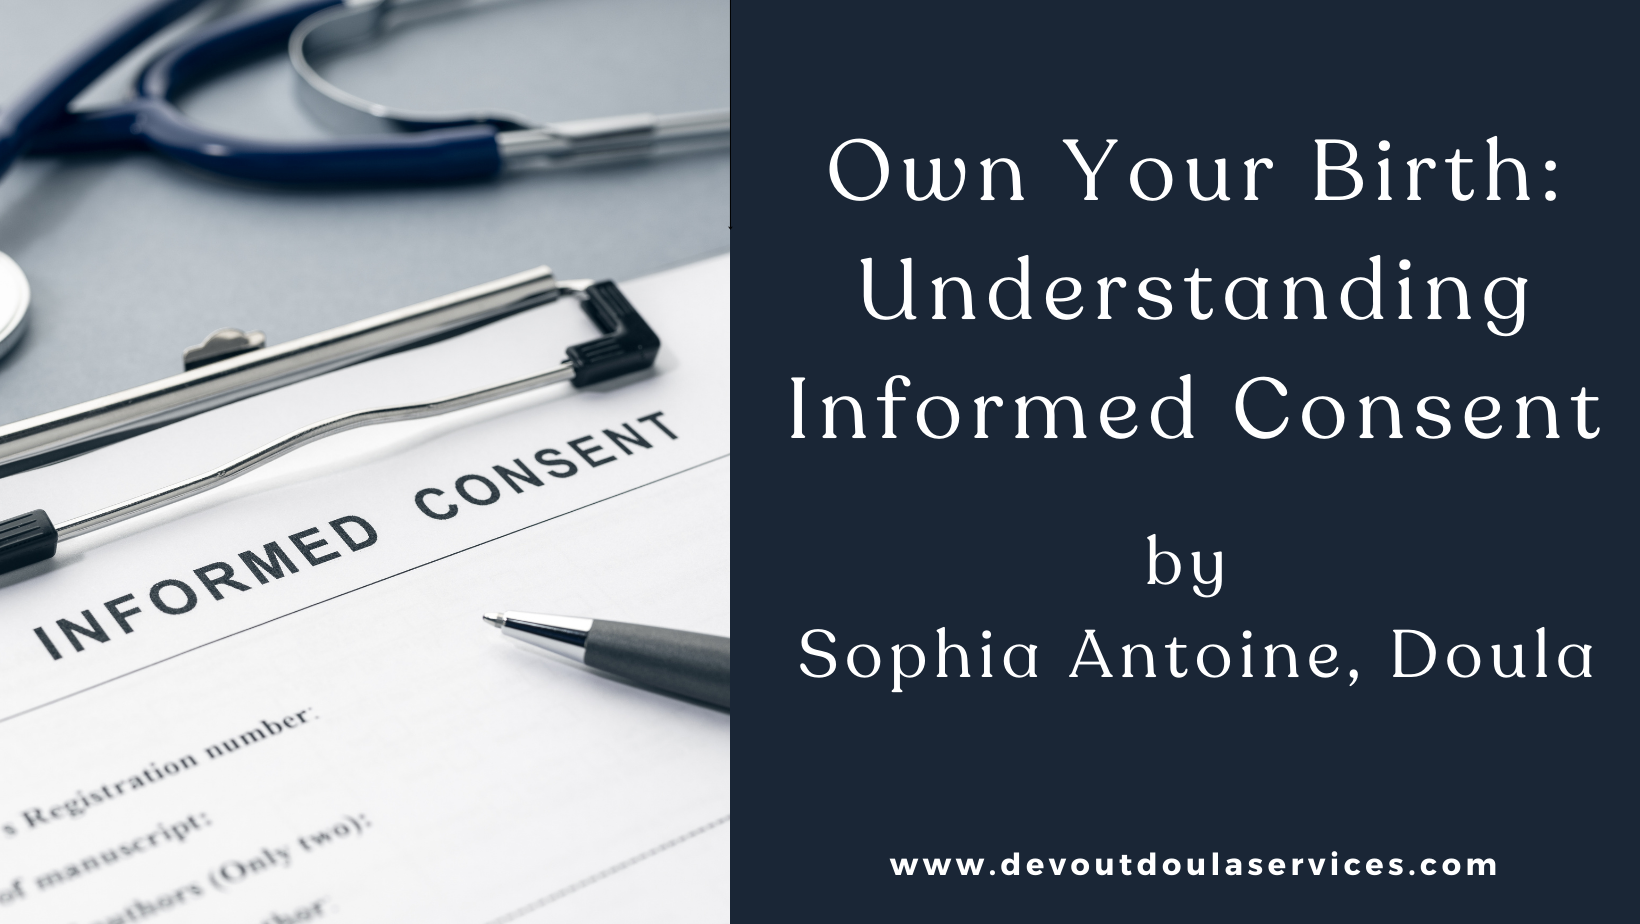 Own your understanding of informed consent in birth with Sophia Antoine